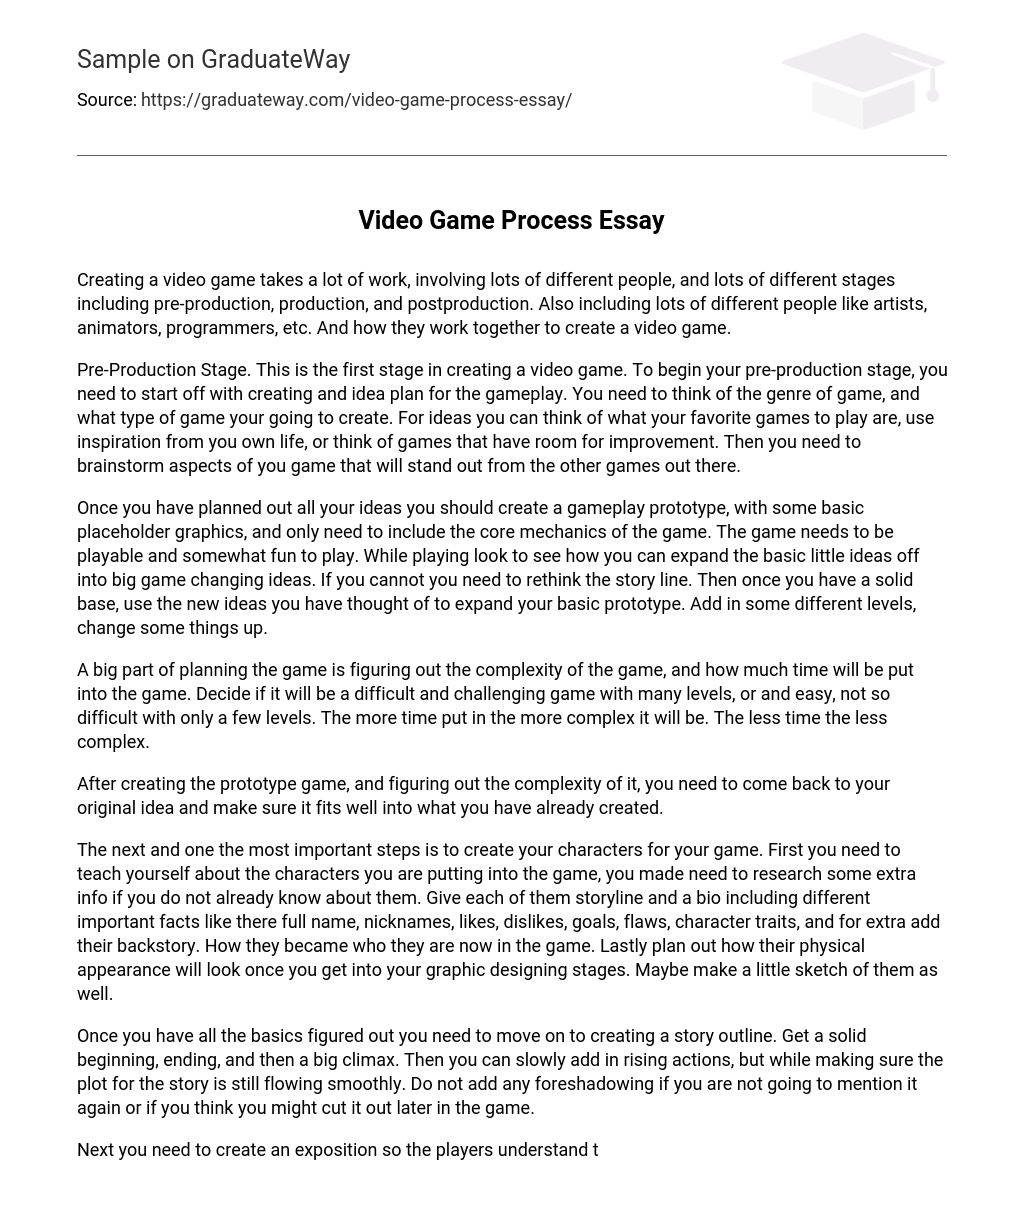 Video Game Process Essay